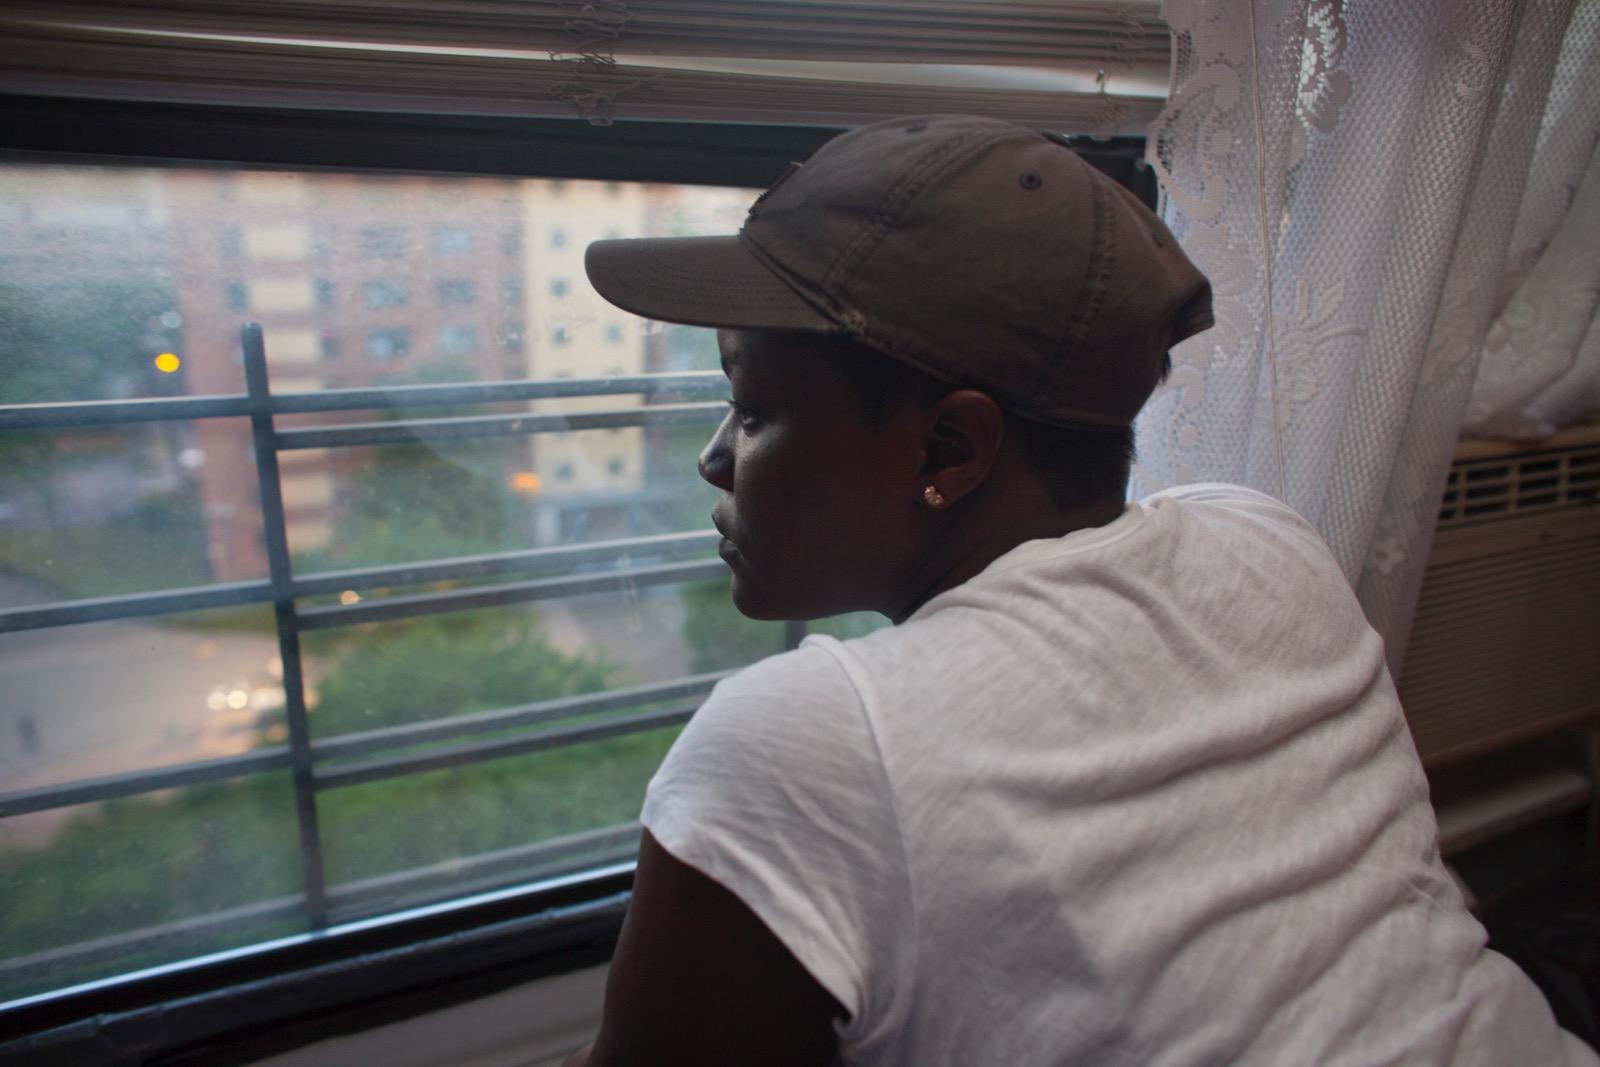 Shaquana looking out the window